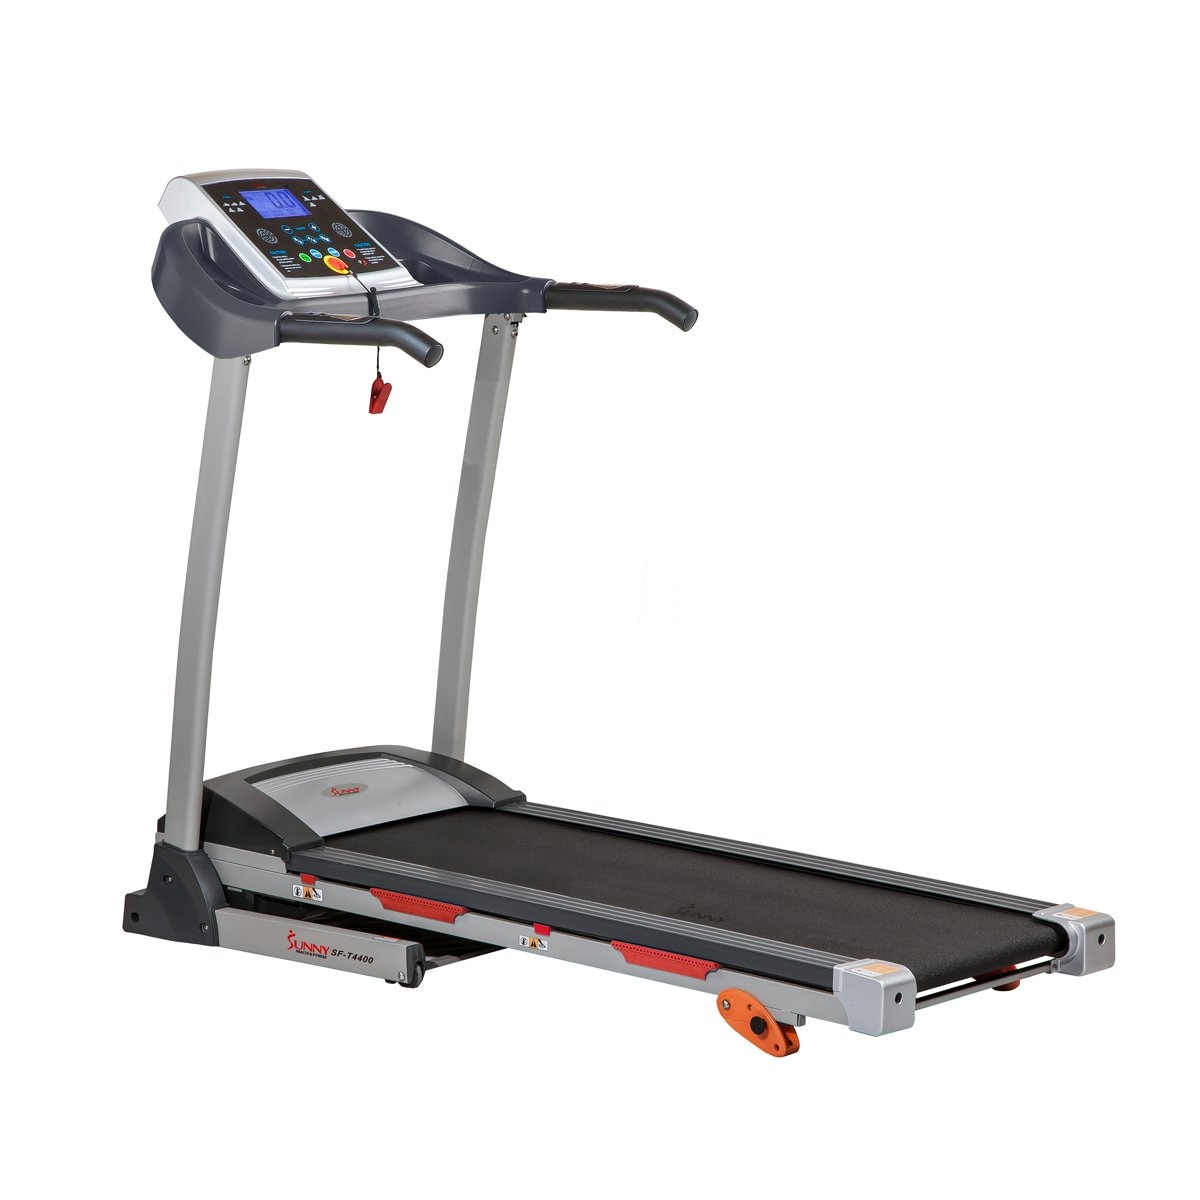 Sunny Health & Fitness Steel Frame Treadmill with Manual Incline and LCD Display | 9 MPH Speed Range | Heart Rate Monitor | Silver Finish | Foldable -  SF-T4400